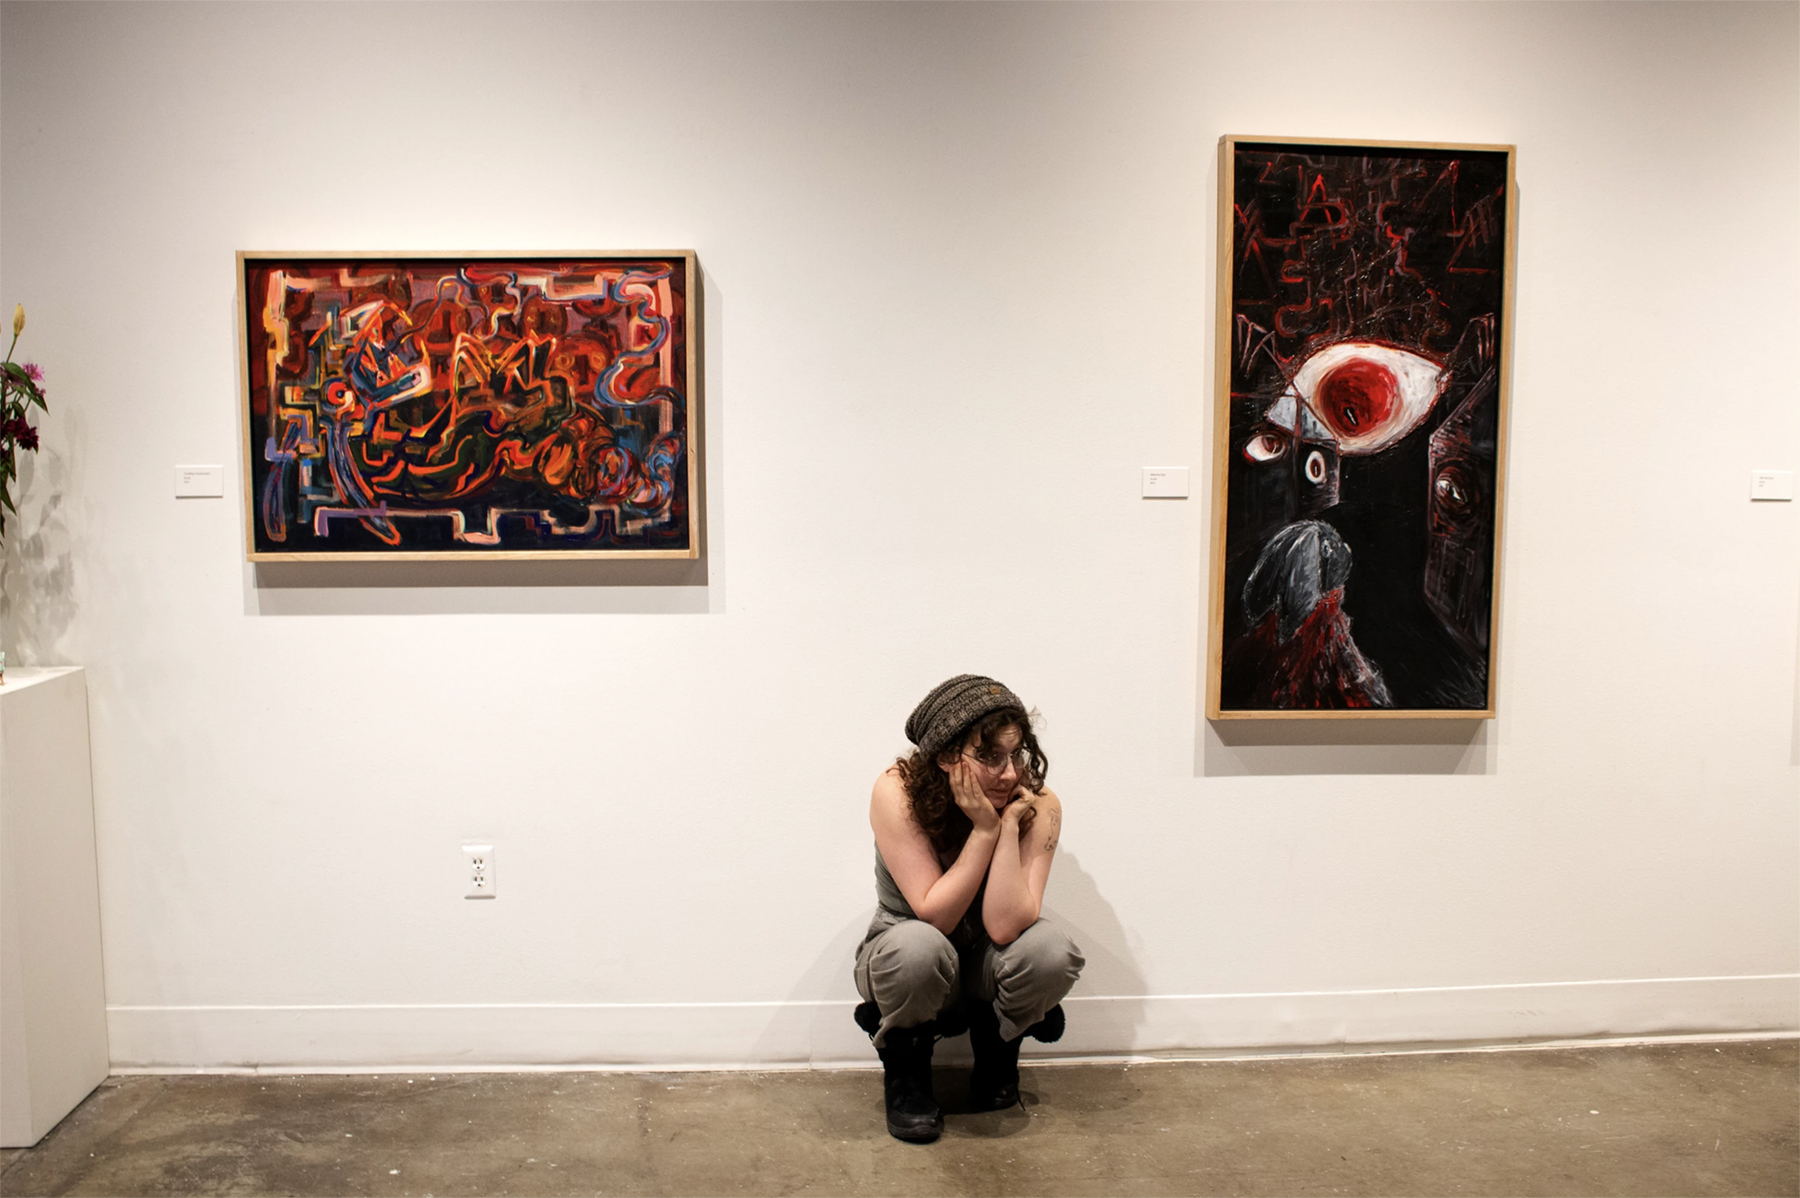 Chana Stern poses under two paintings at the reception for "Pilgrimage of the Revenant", courtesy of the artist